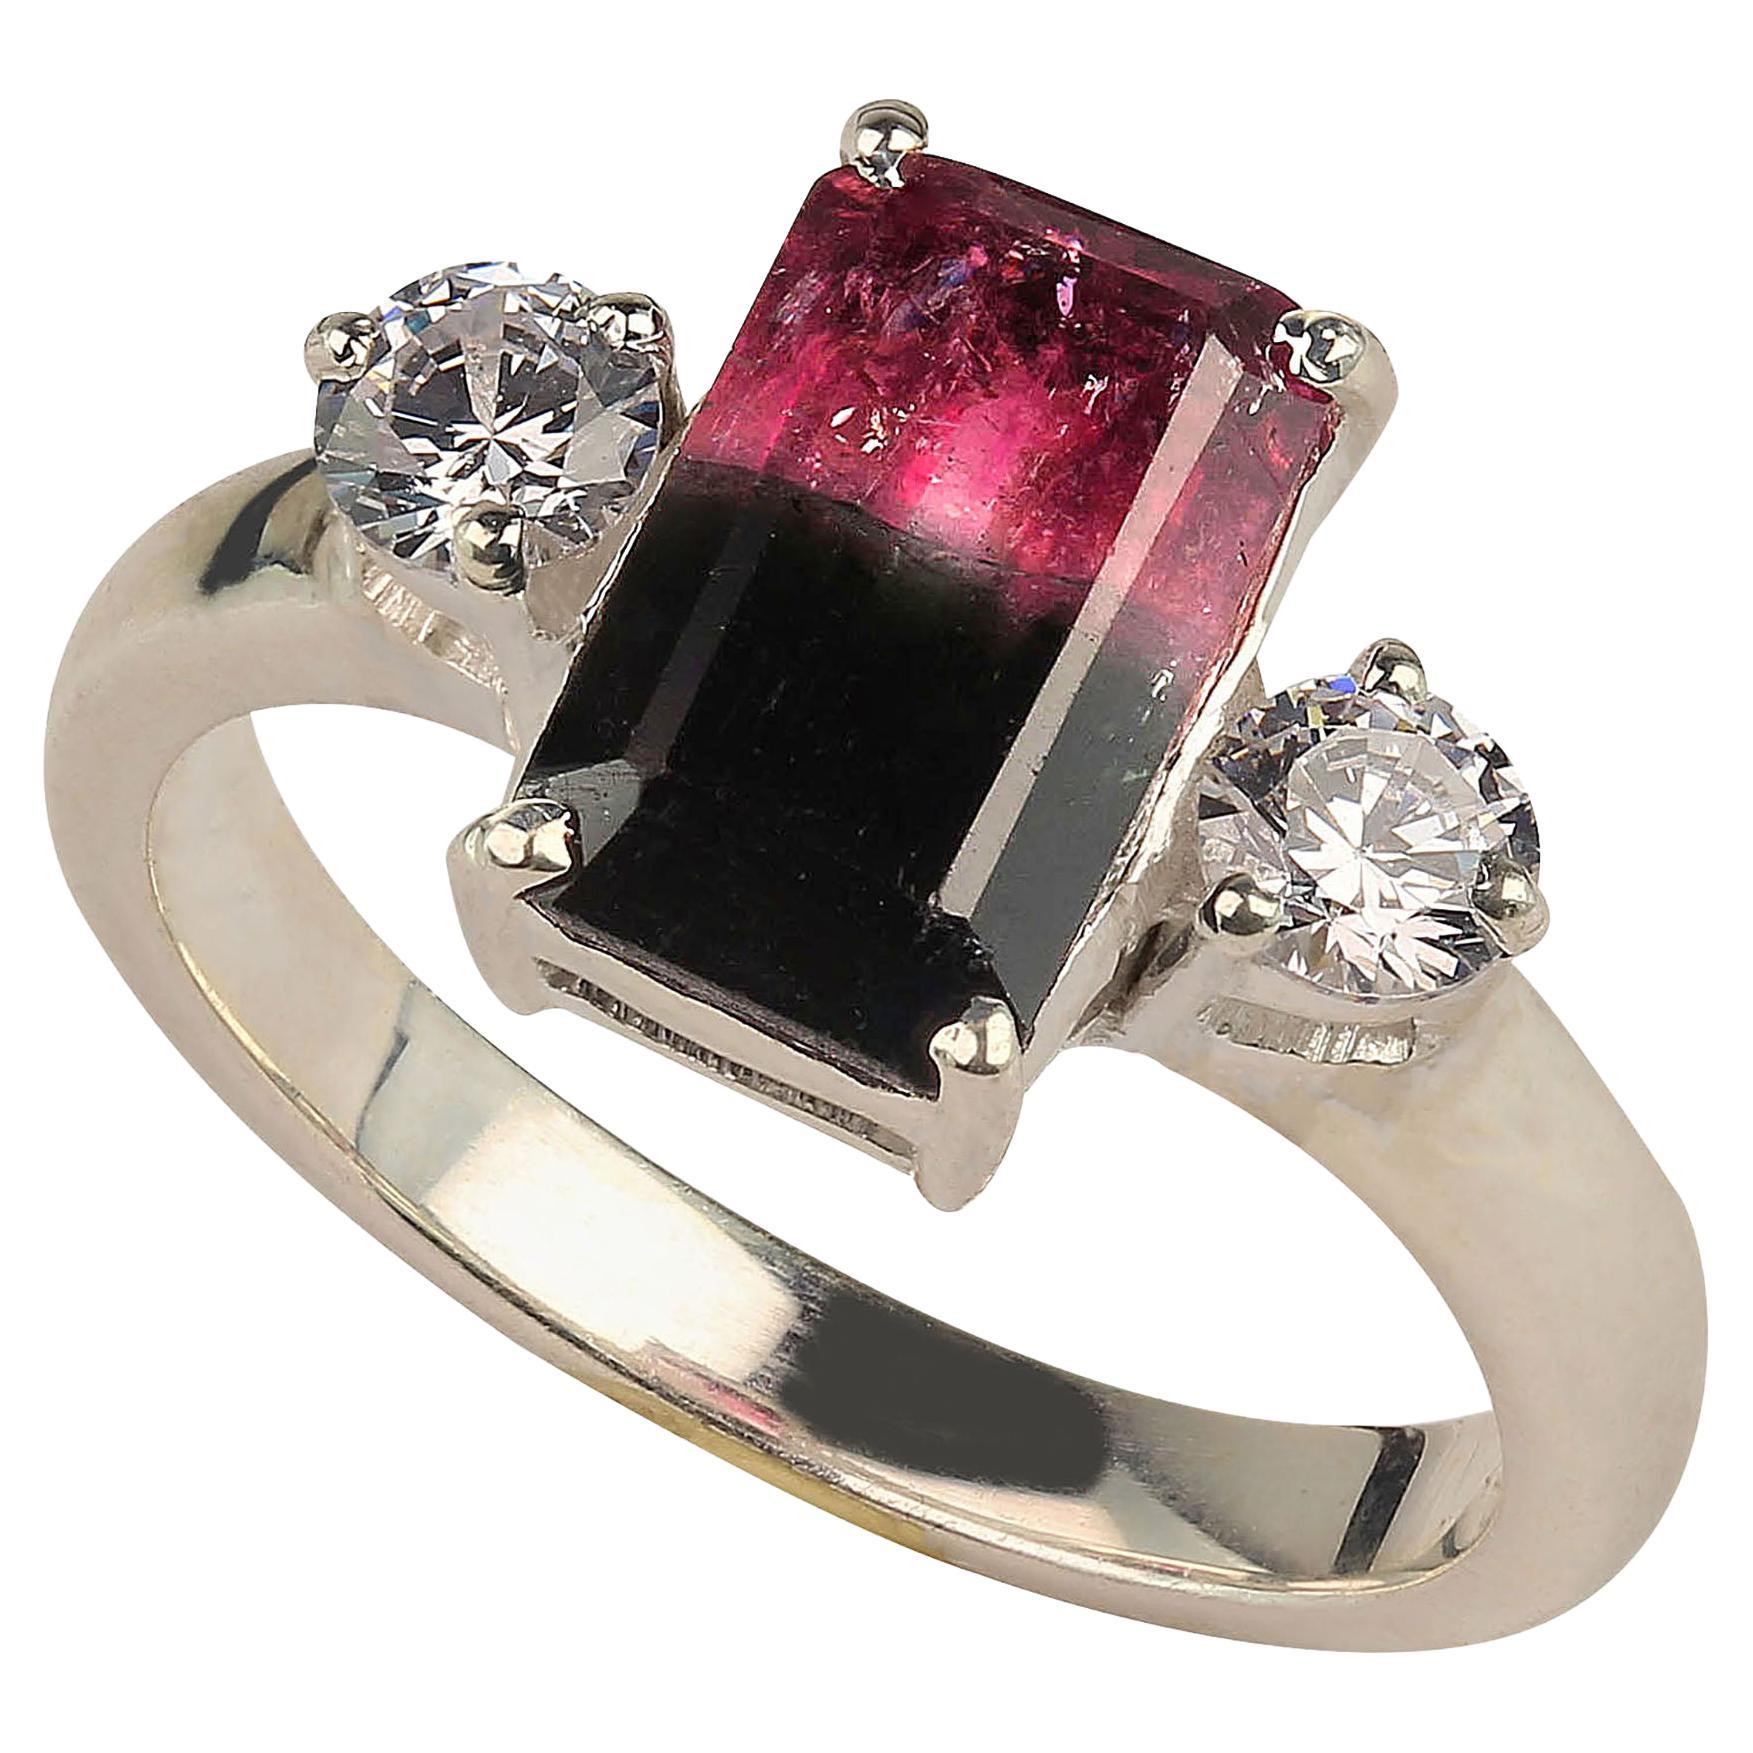 AJD Bi-Color Tourmaline Accented with Sparkling Cambodian Zircons Ring